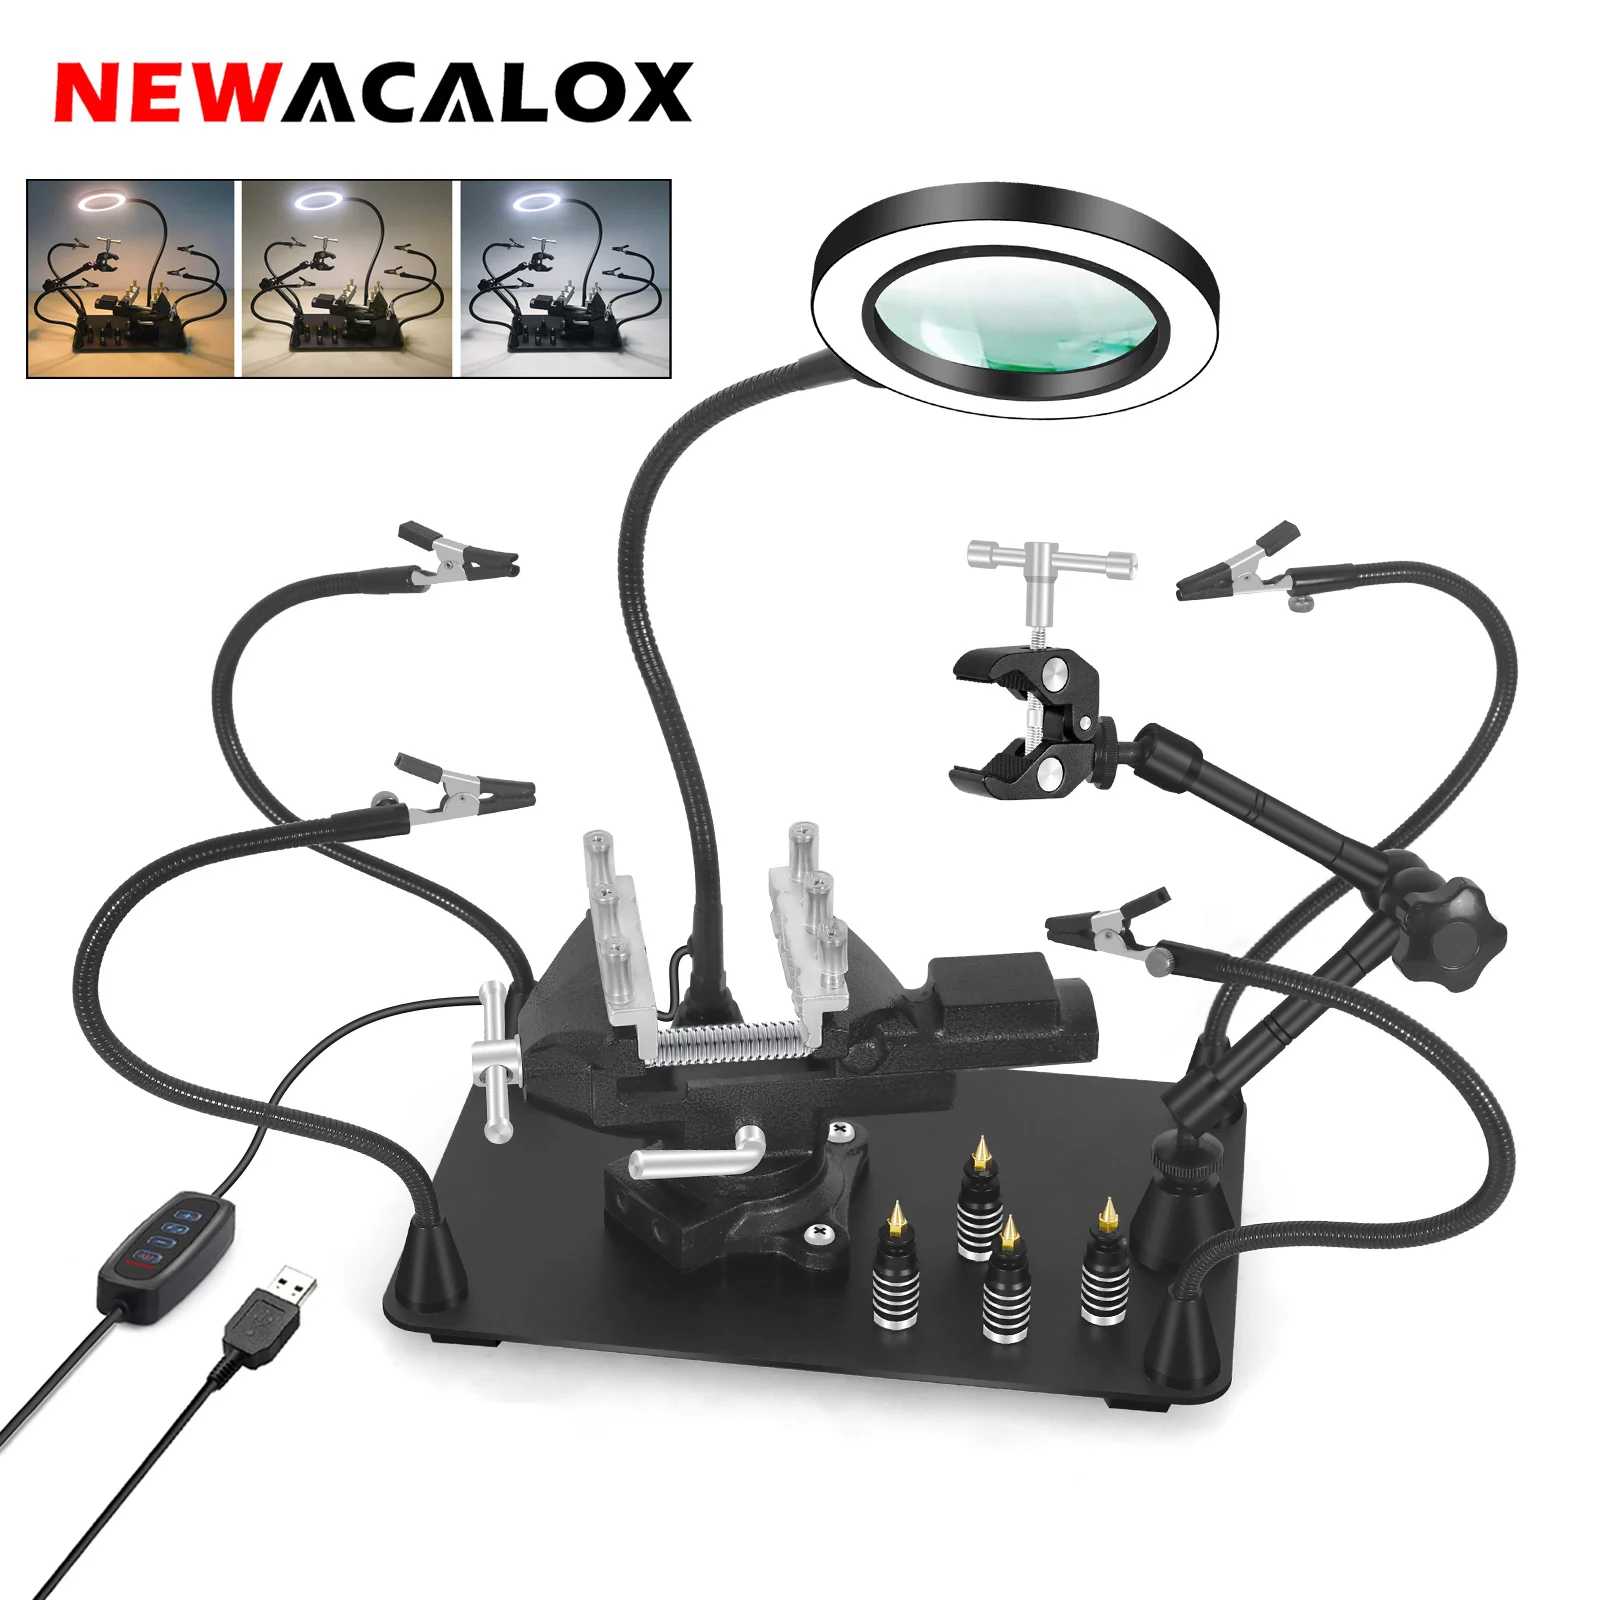 NEWACALOX Magnetic Helping Hands Soldering Third Hand PCB Circuit Board Holder with 5X LED Magnifying Lamp 360 Heat Gun Holder newacalox magnetic pcb circuit board holder flexible arm soldering third hand welding station soldering iron stand repair tools